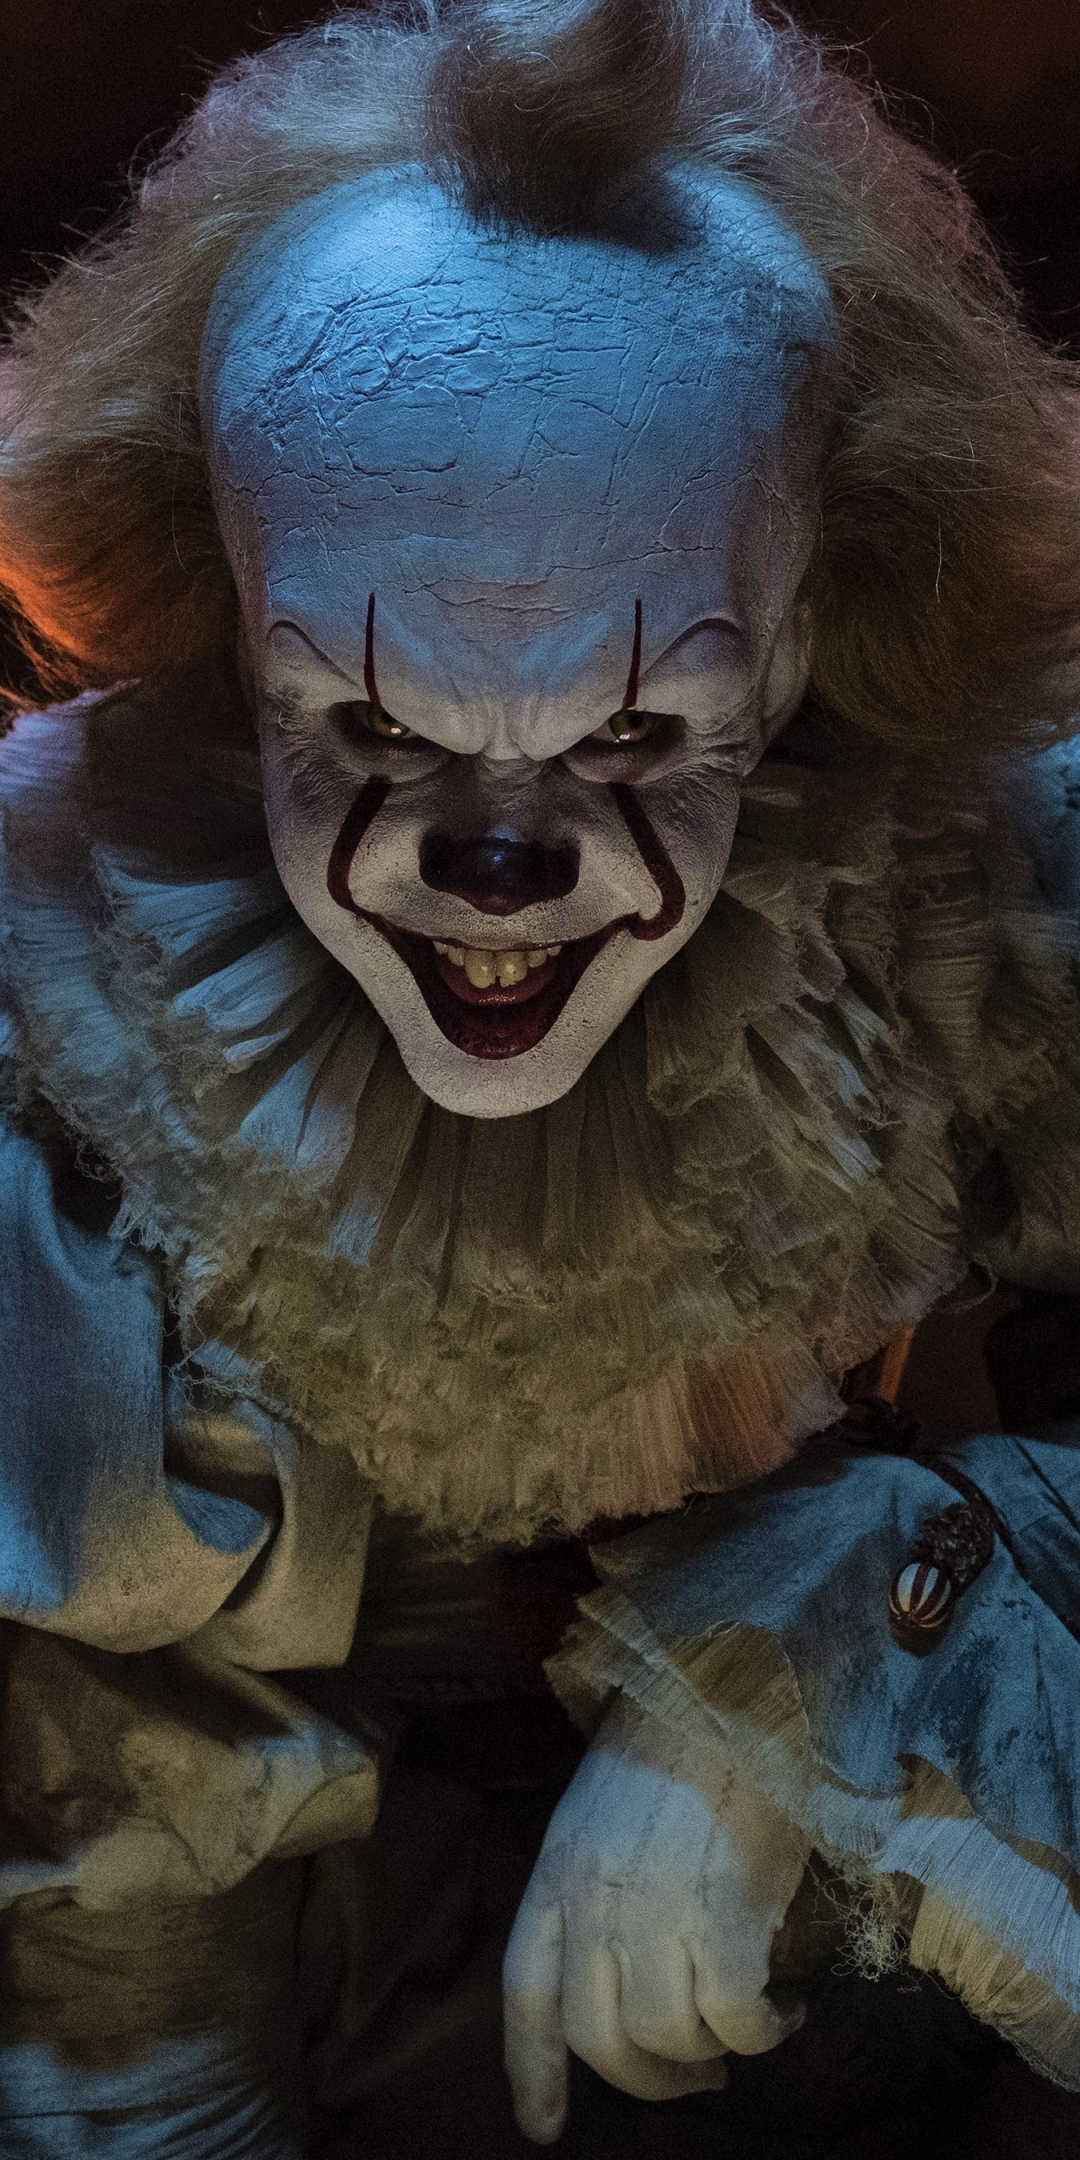 Pennywise the clown from it 2017 - Clown